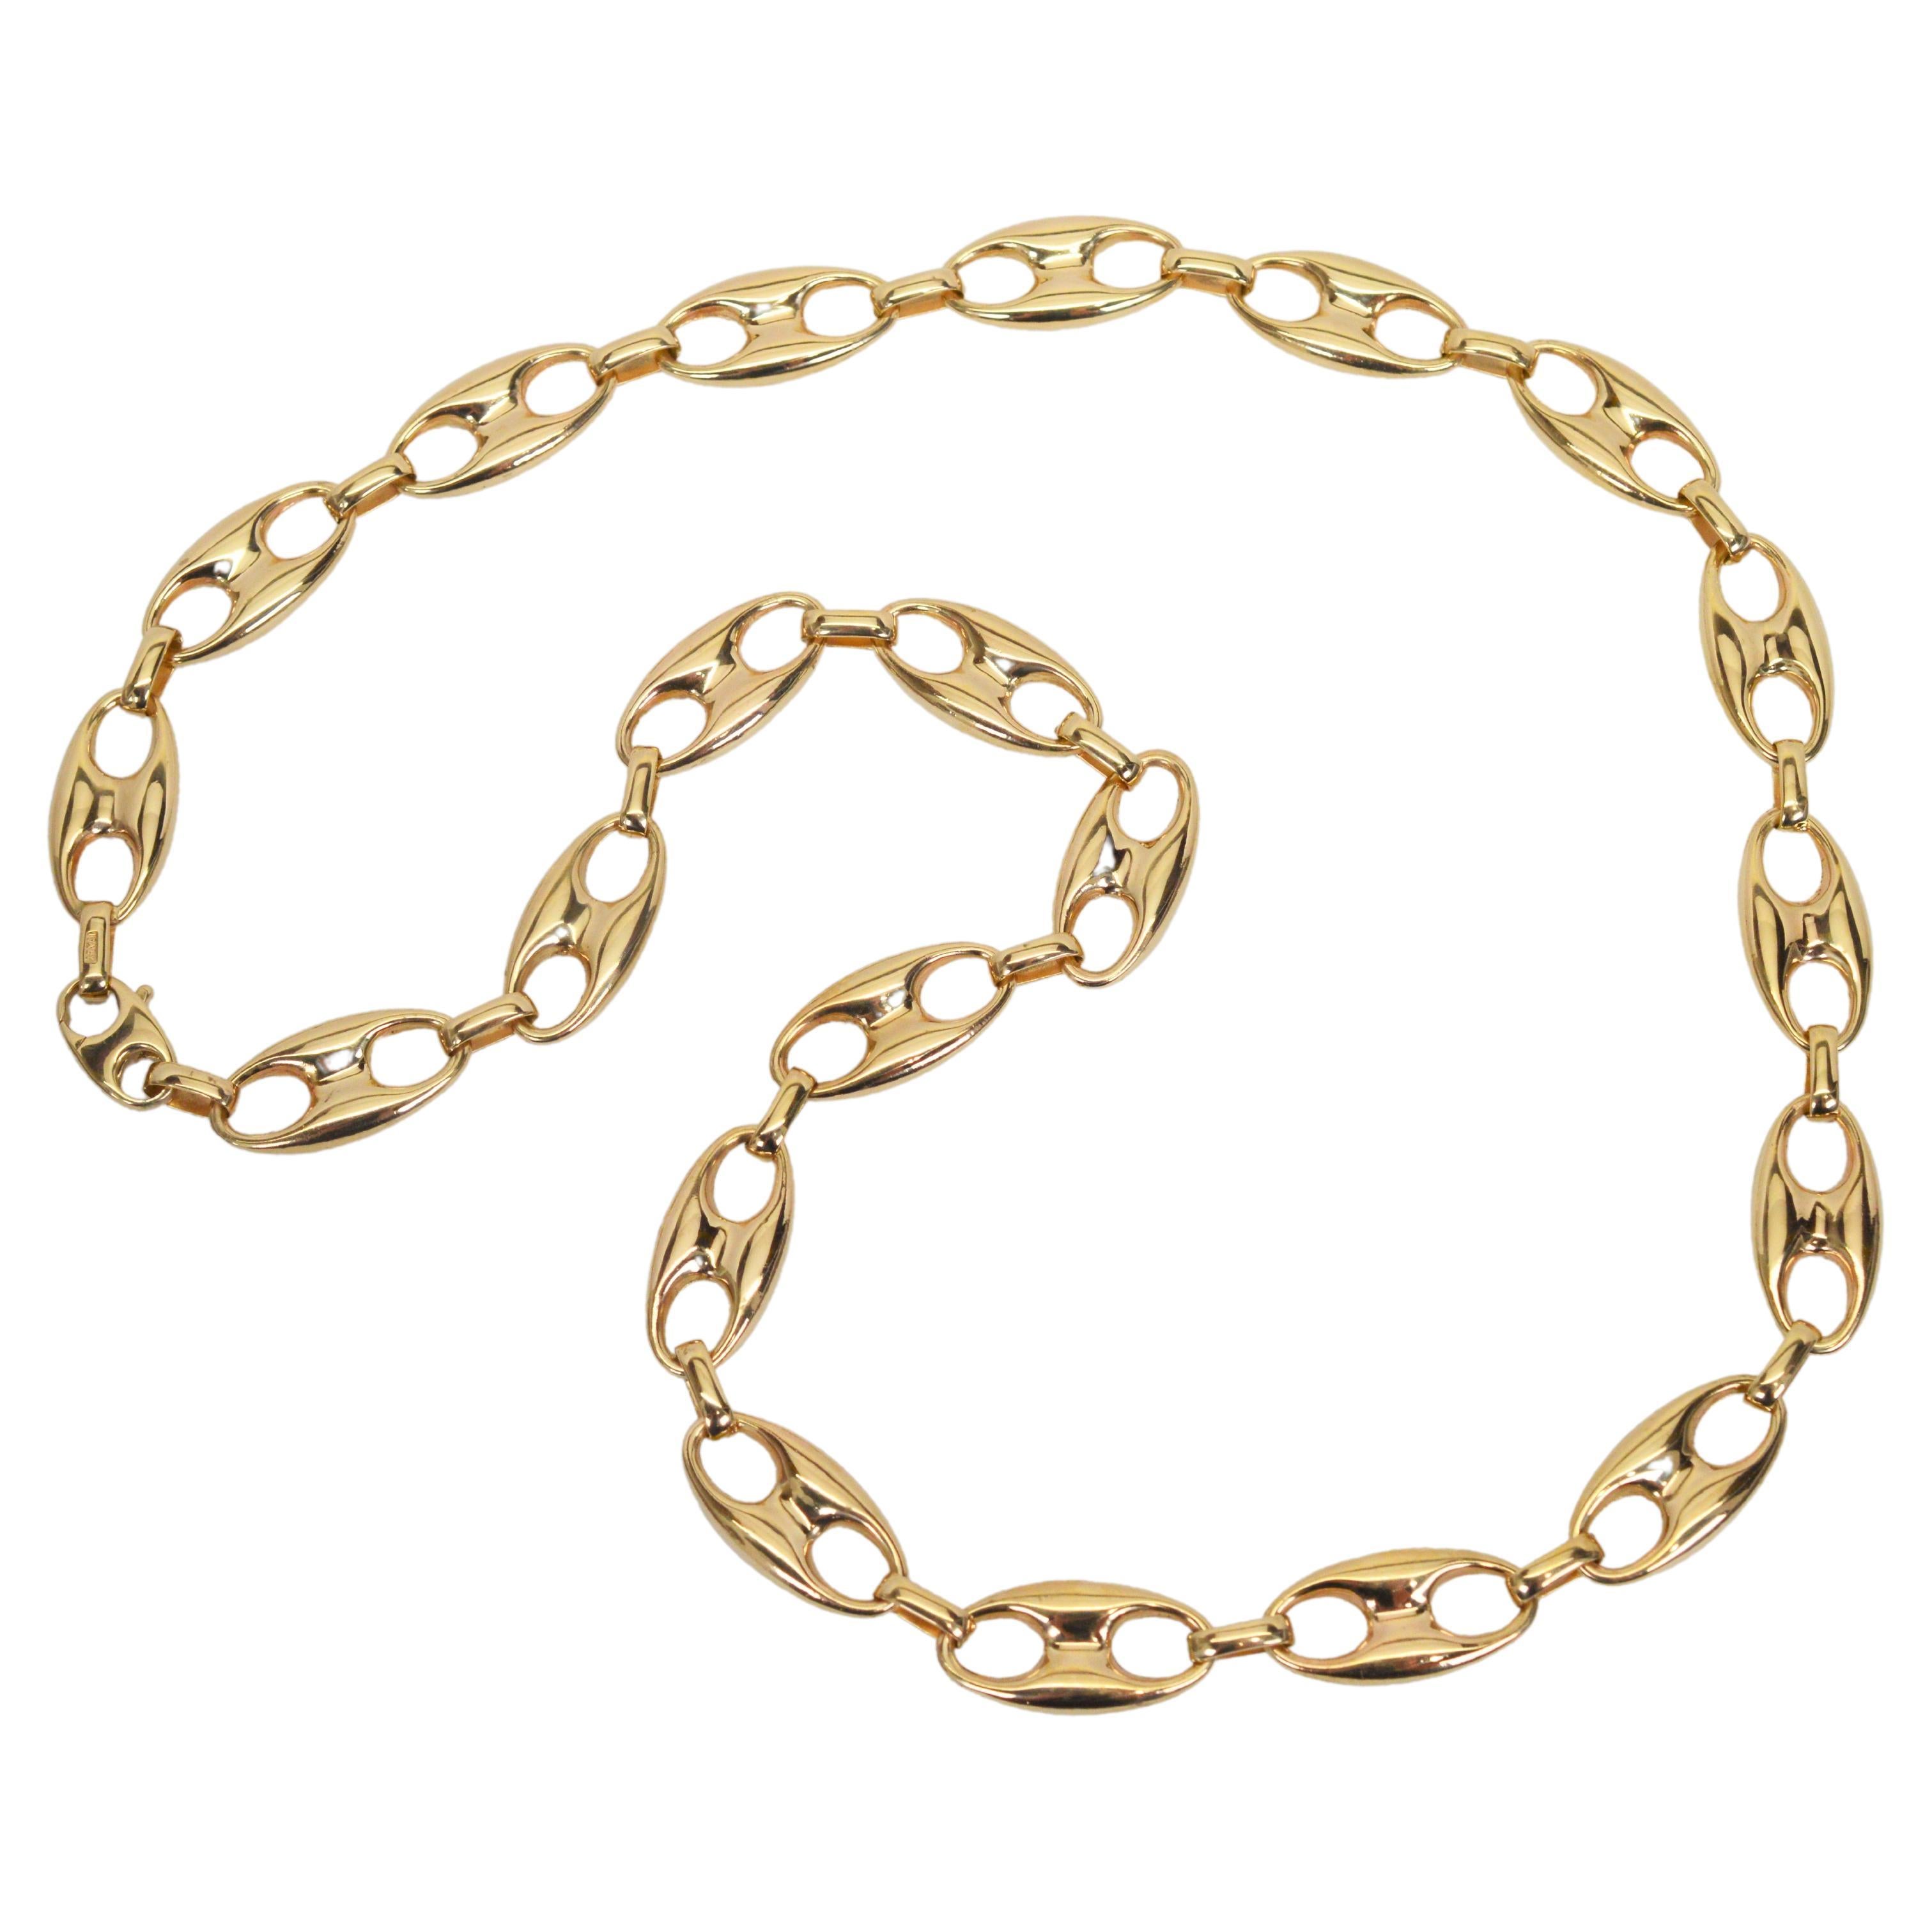 A timeless bold accent to brighten even the simplest of outfits. In fourteen karat yellow gold 14K, generously sized Mariner style chain links measuring 23mm x 12mm create this versatile 24 inch necklace.  Finely crafted in Italy and finished with a